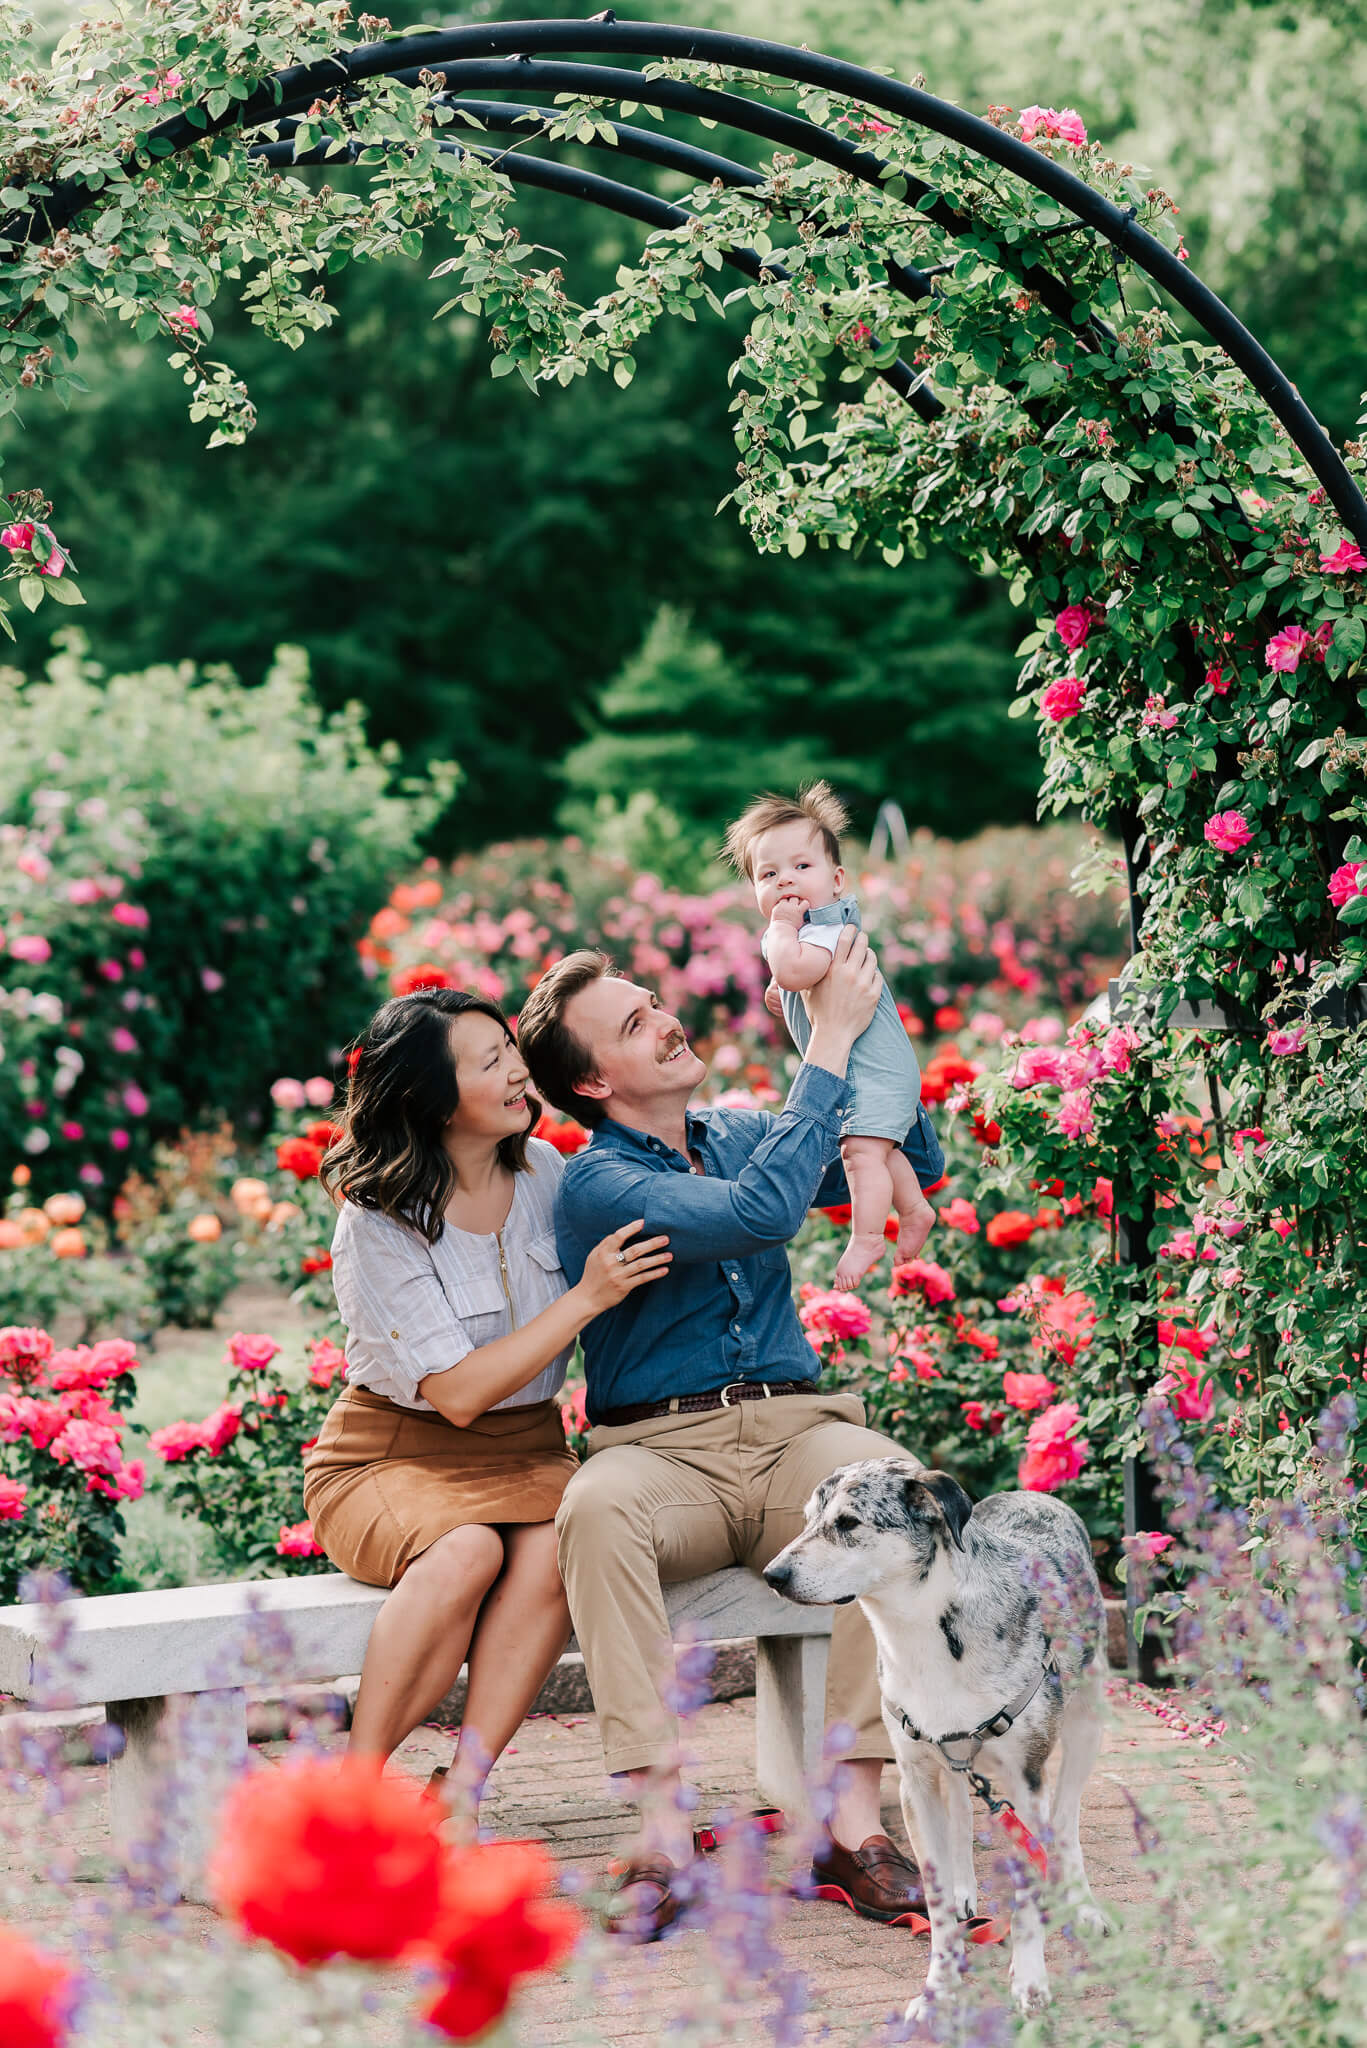 A mother and father lift and play with their infant son in blue overalls while sitting under an arch of roses on a marble bench with their dog